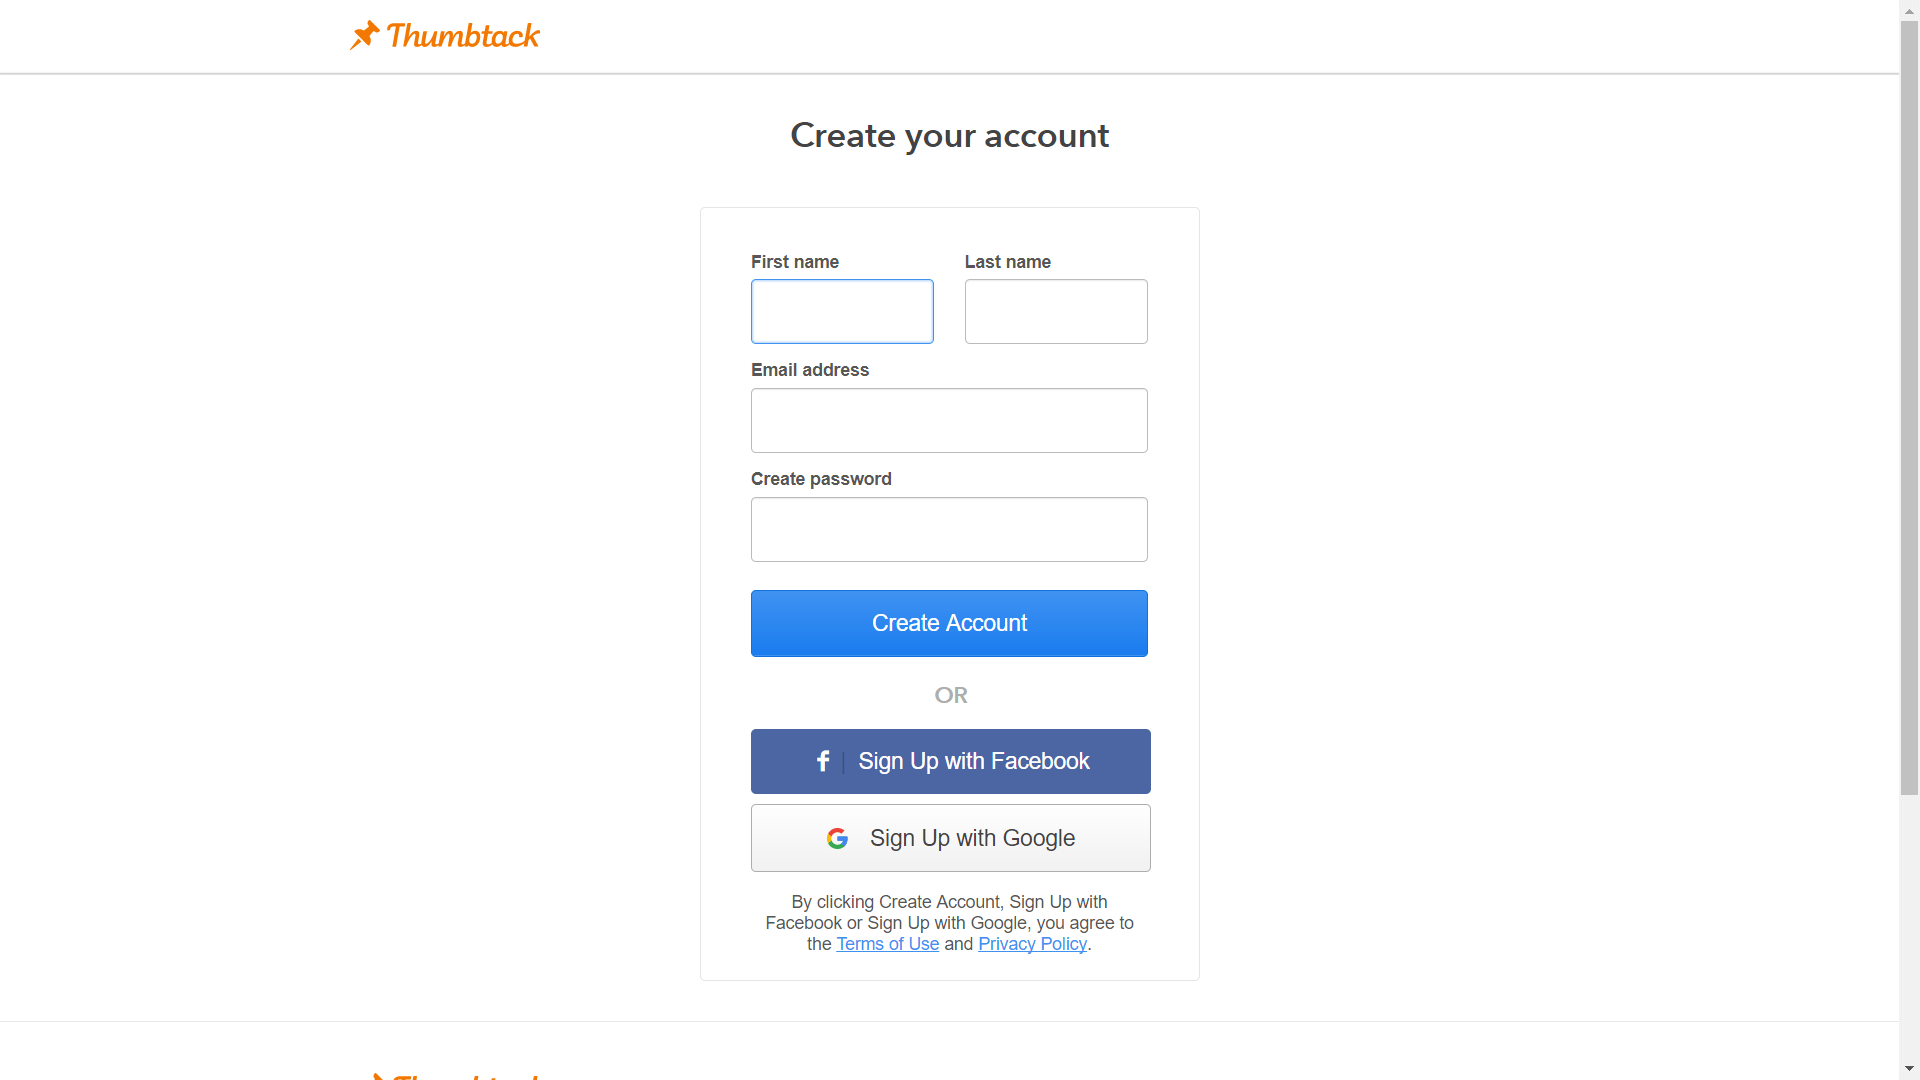 Add Business to Thumbtack 2 TribeLocal